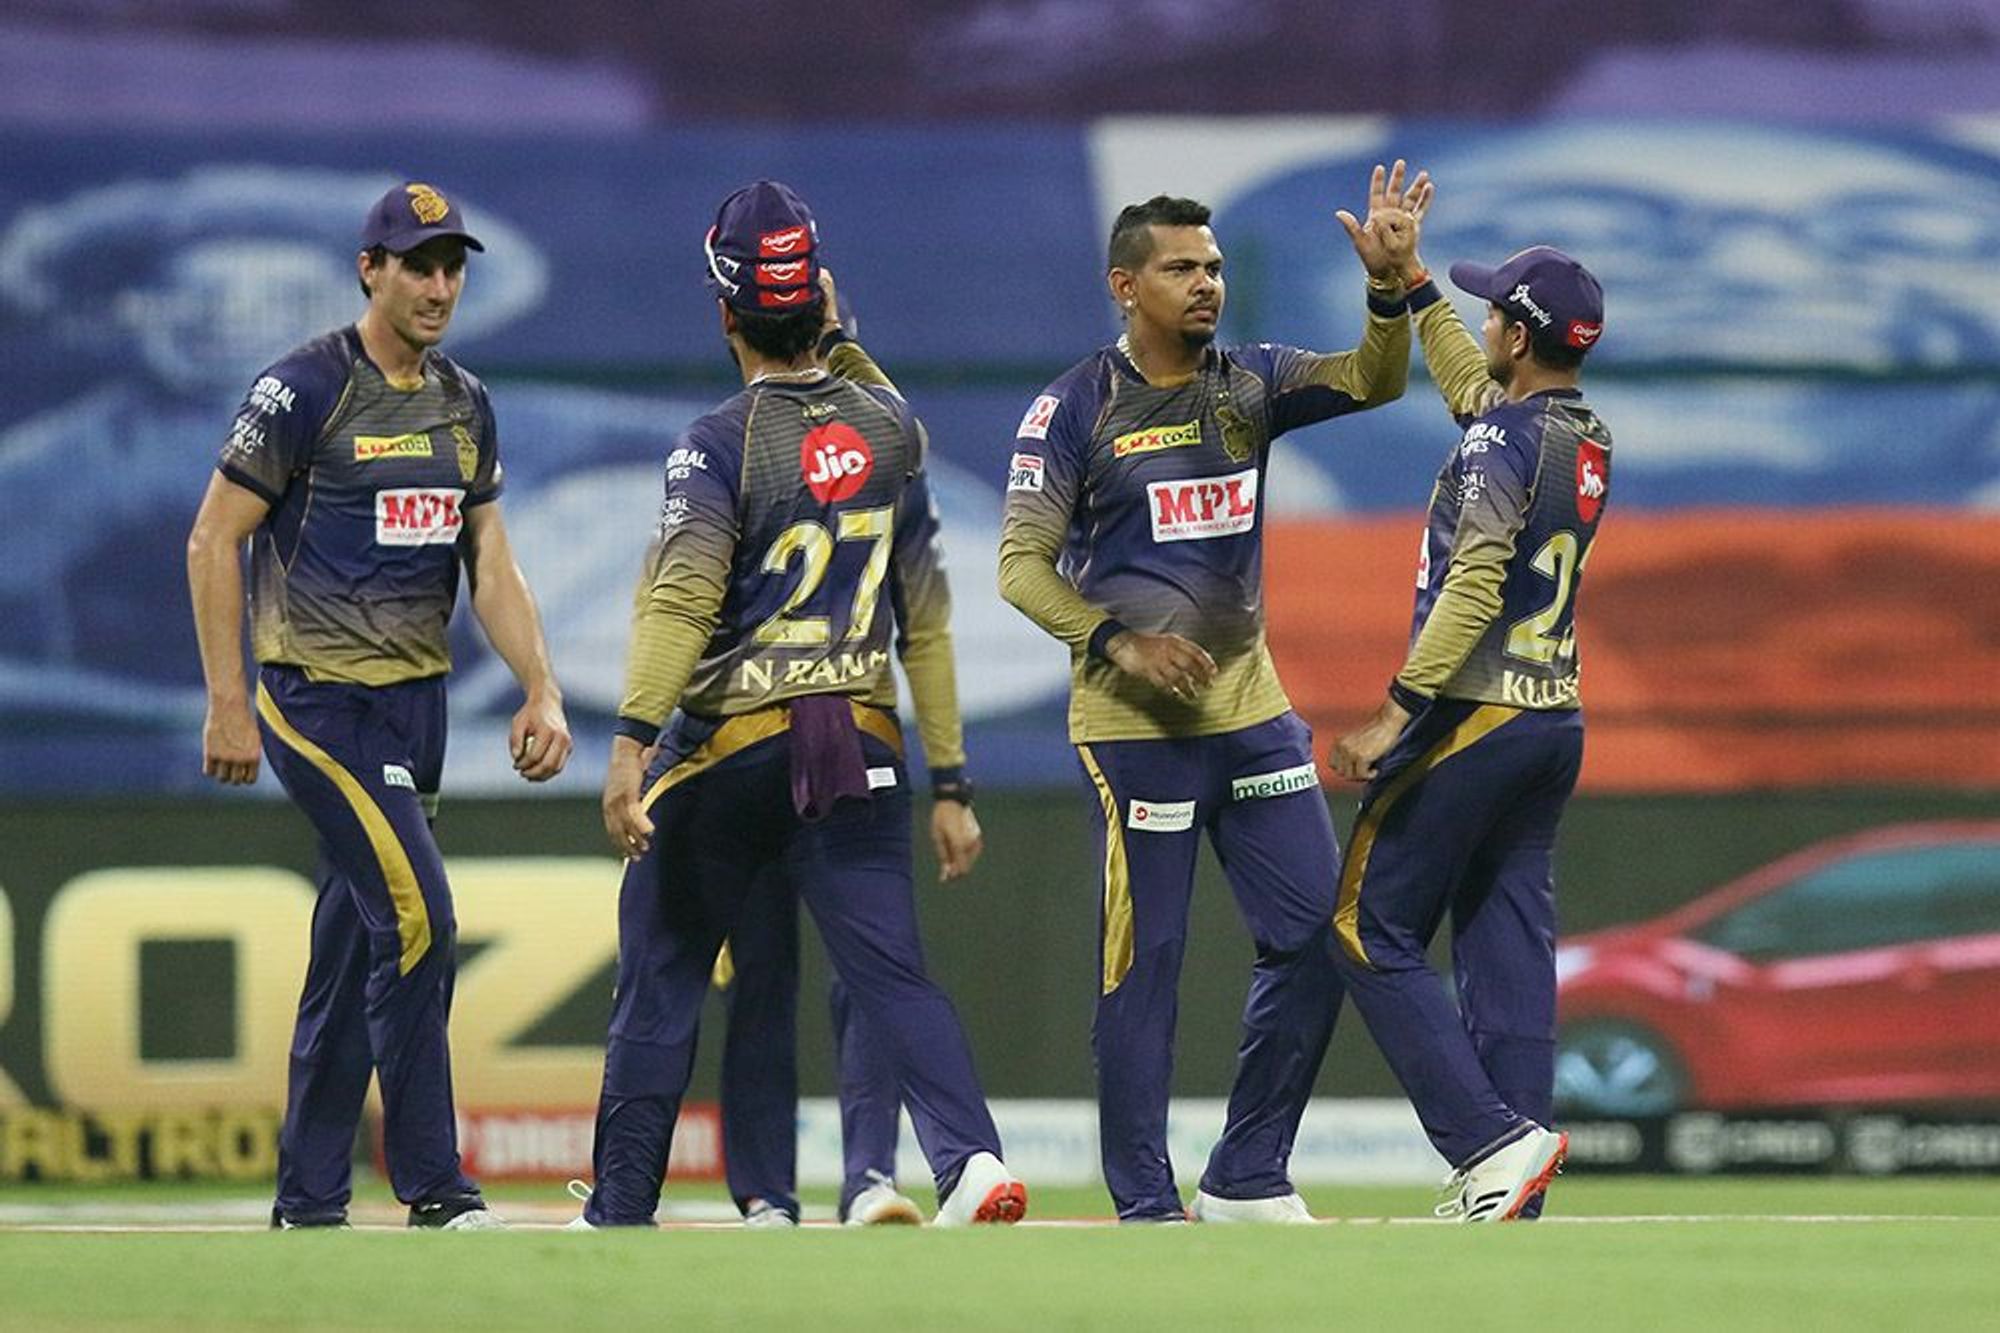 ipl-2020-kolkata-knight-riders-and-mumbai-indians-to-come-face-to-face-today